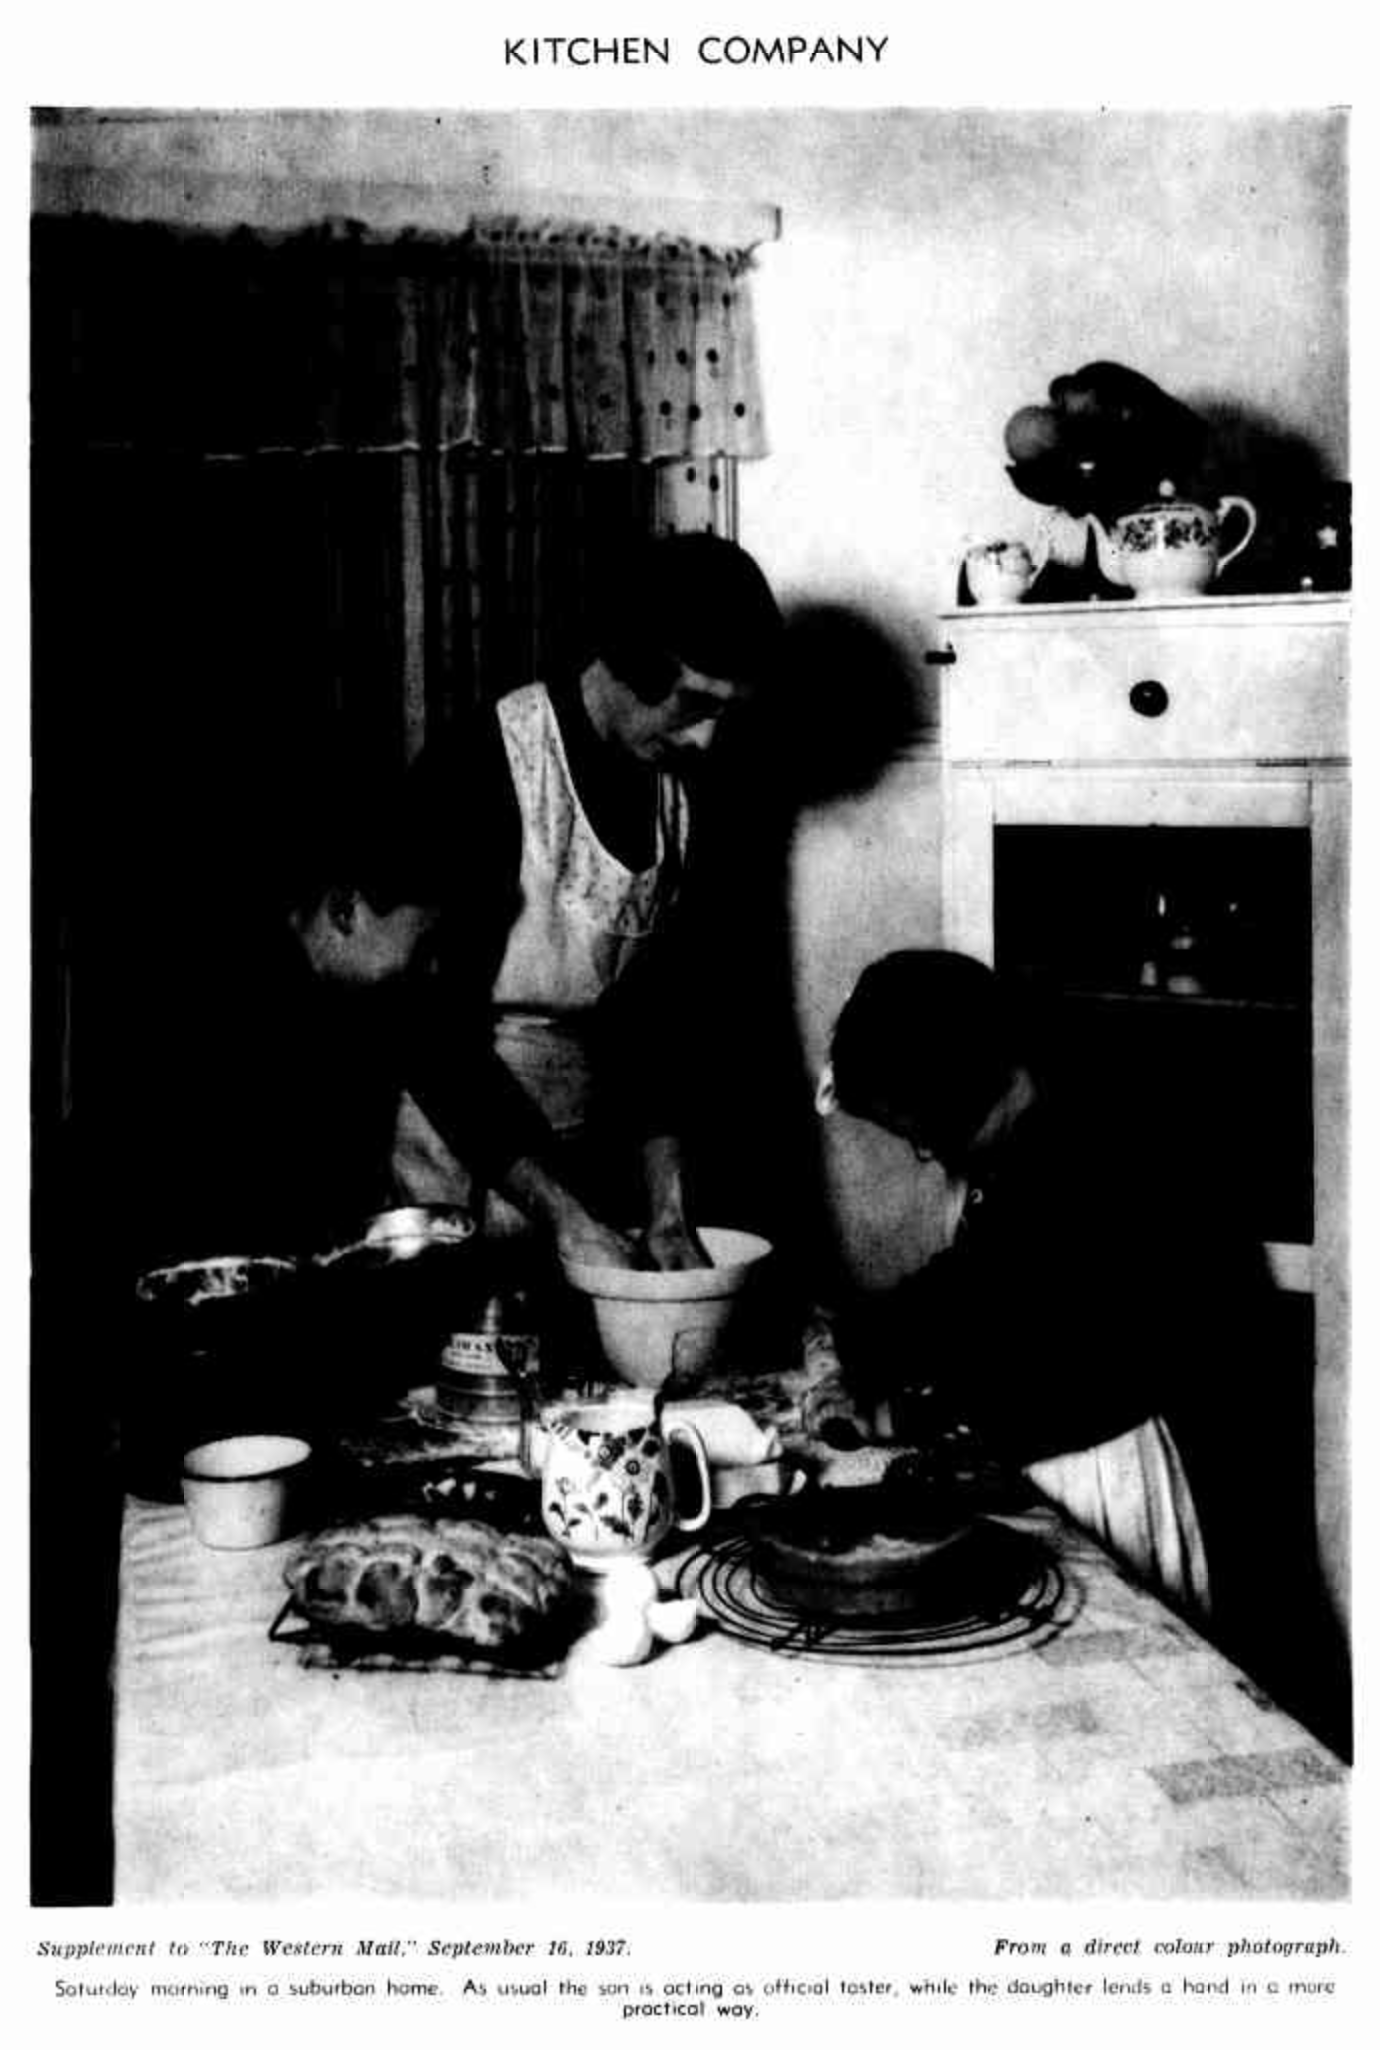 a women cooking in a kitchen accompanied by her two young children